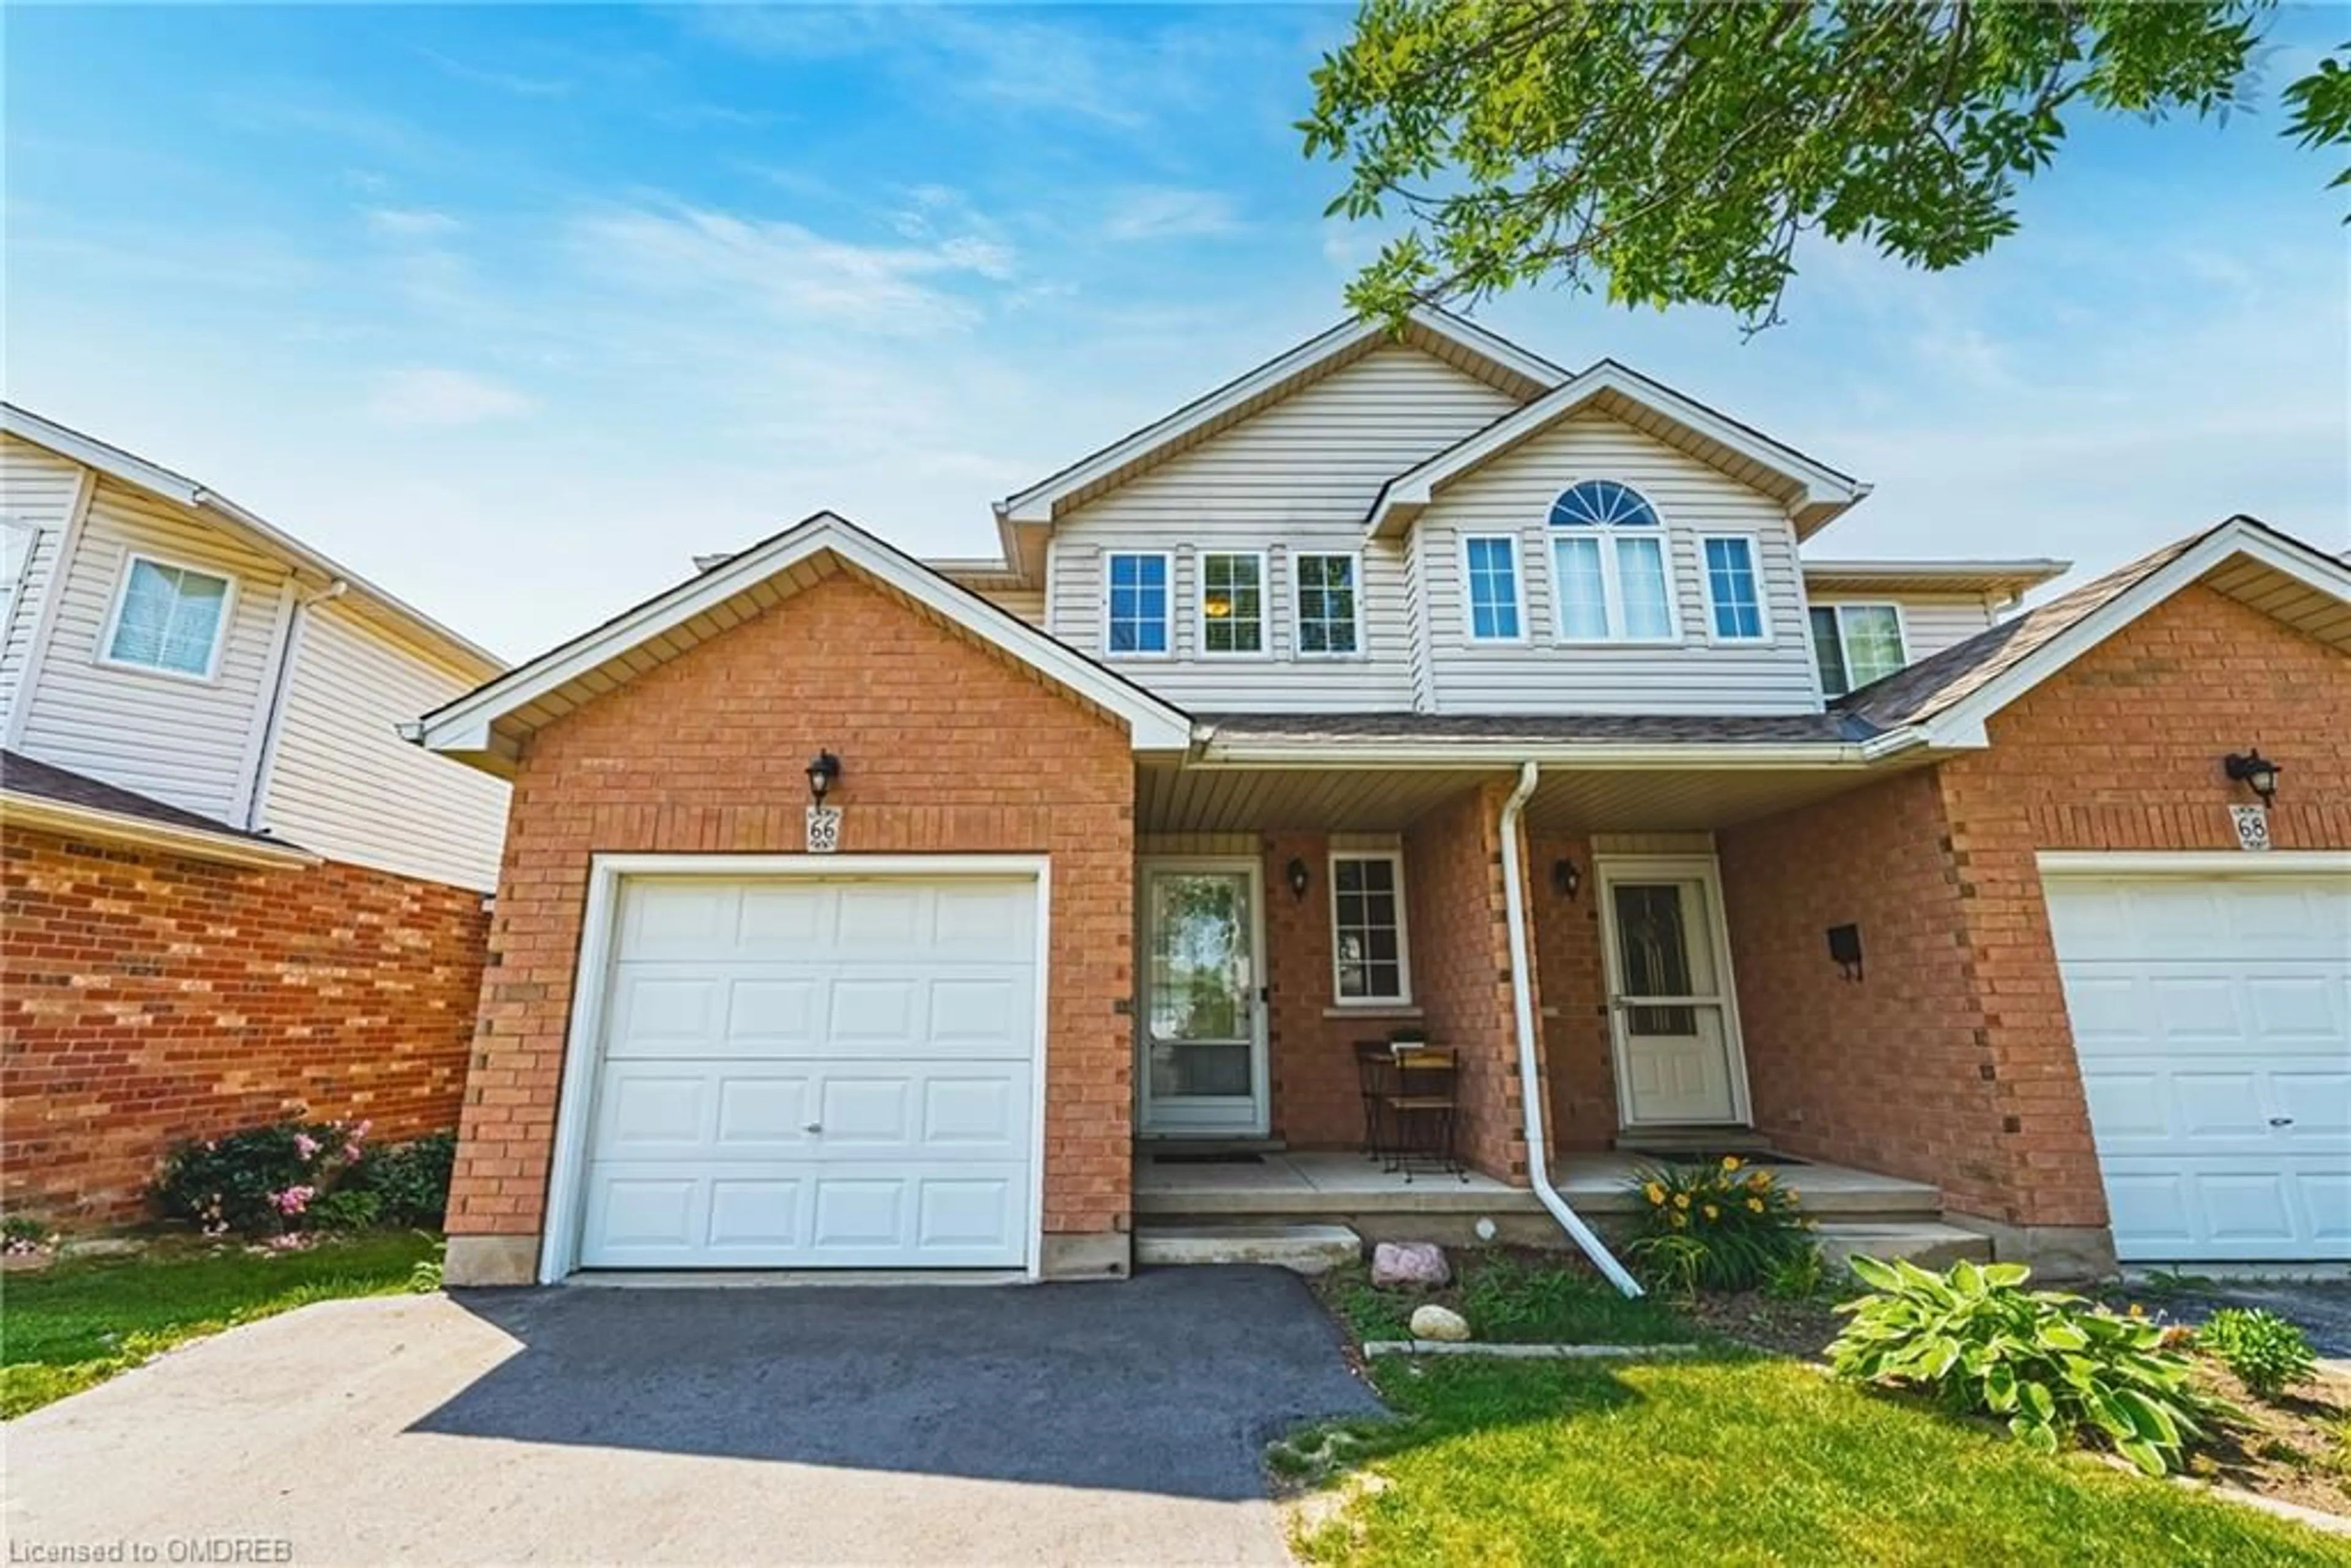 Home with brick exterior material for 66 Raspberry Lane, Guelph Ontario N1E 7H4